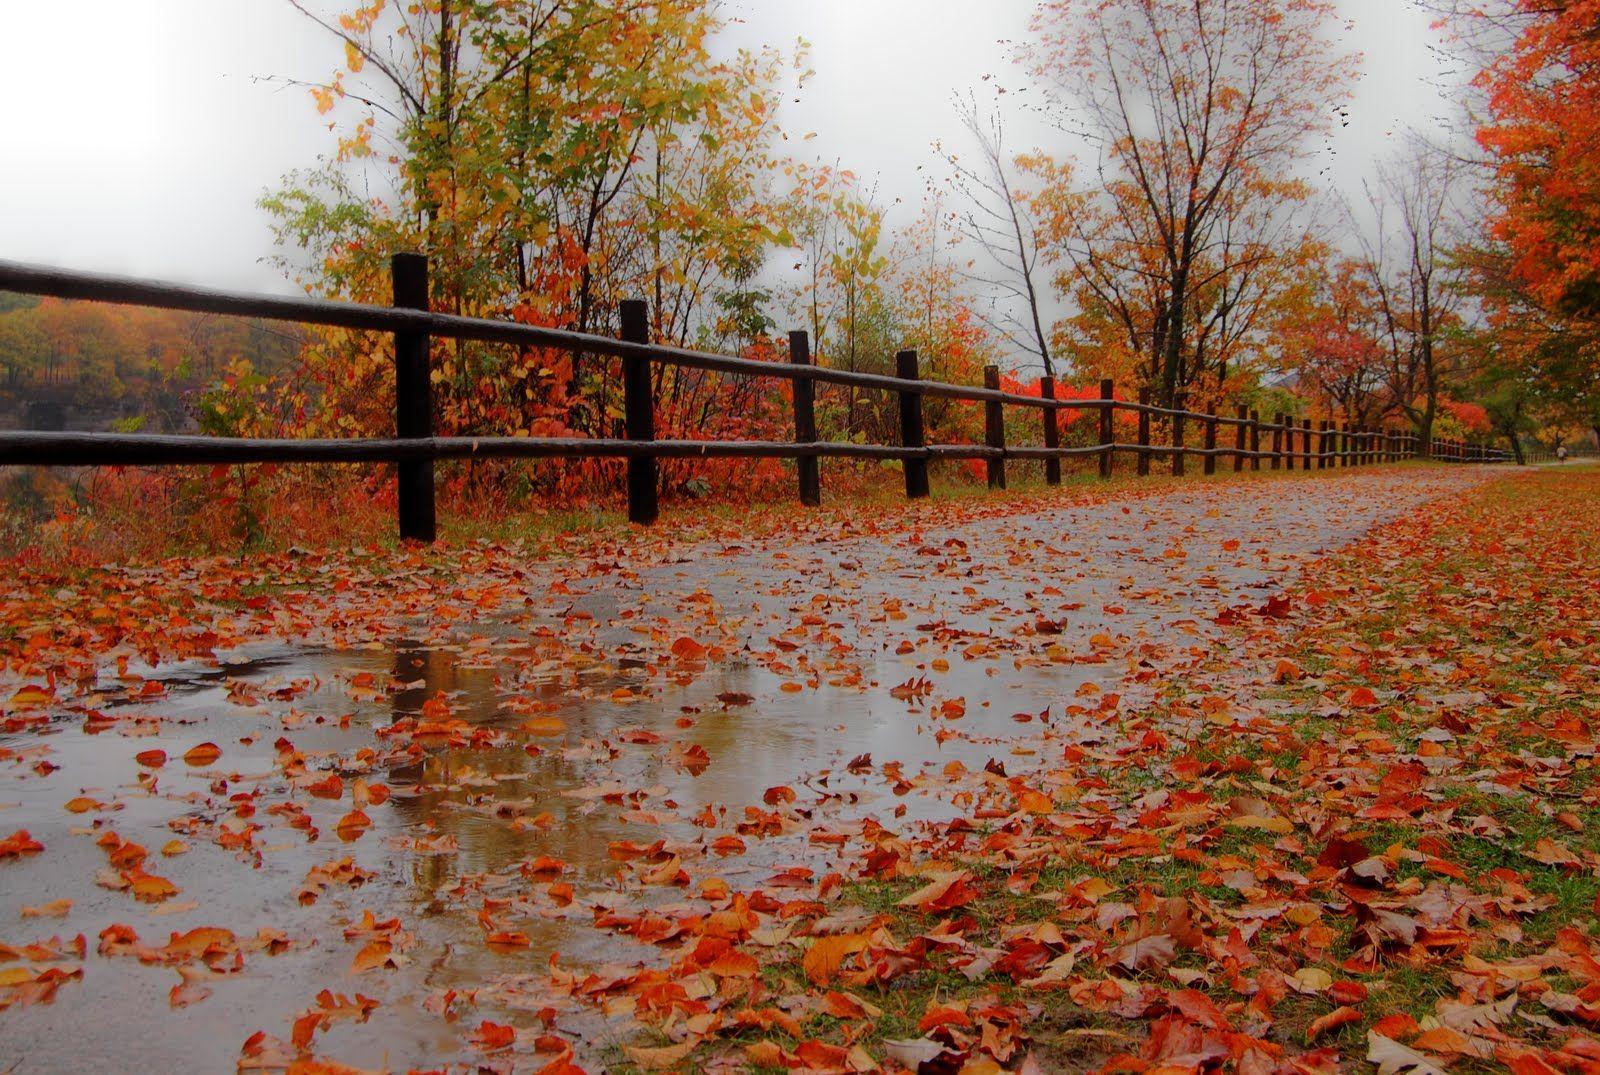 rainy day picture of fall. Rainy Fall Day I went out